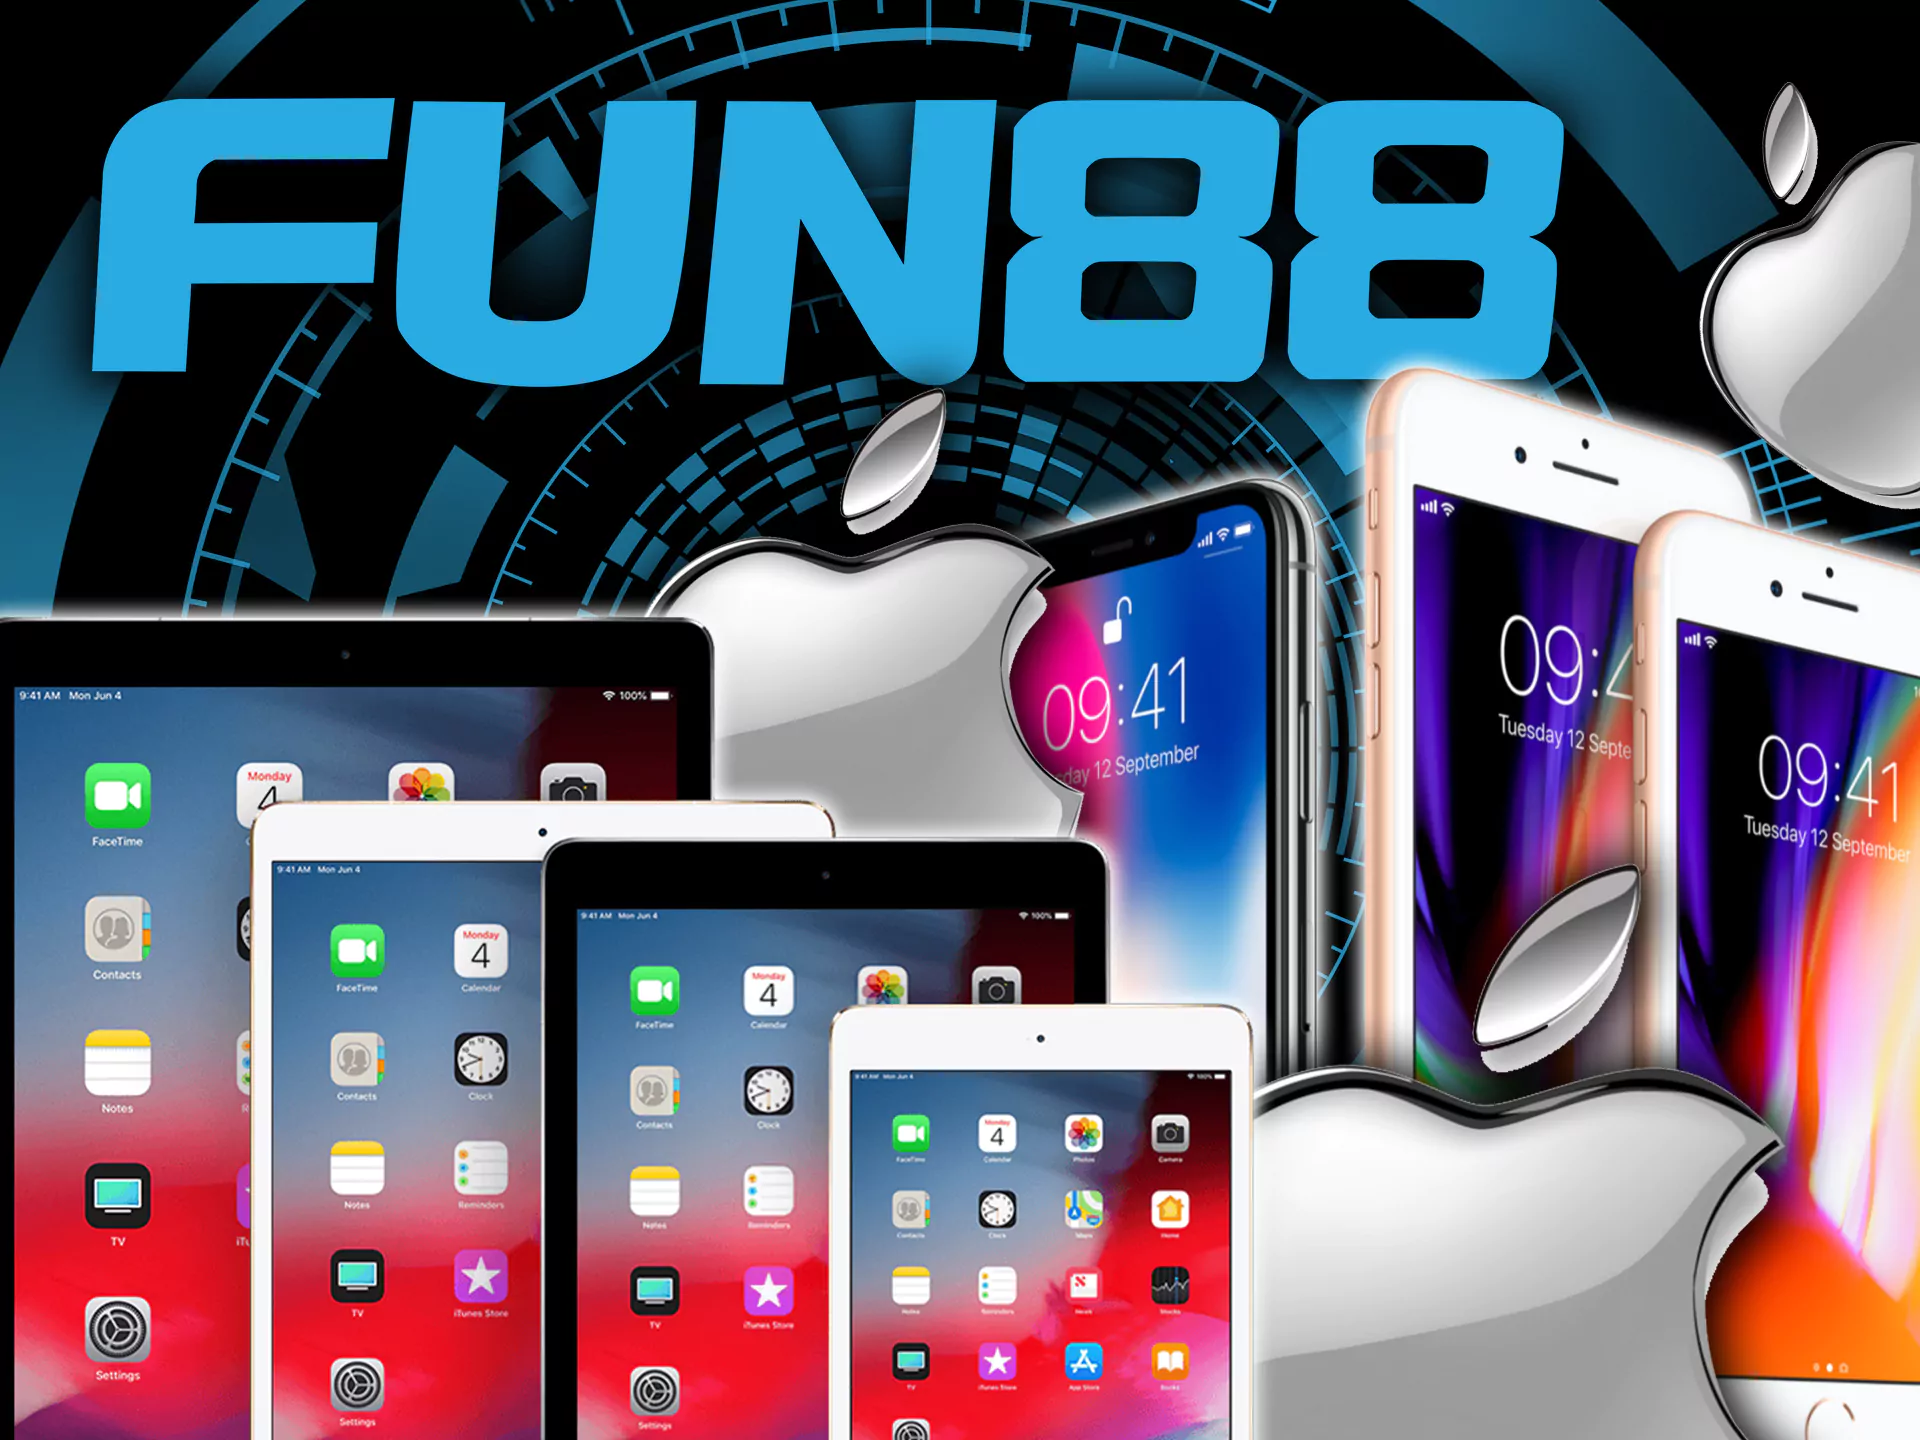 You can download and install the Fun88 app on any of these devices.